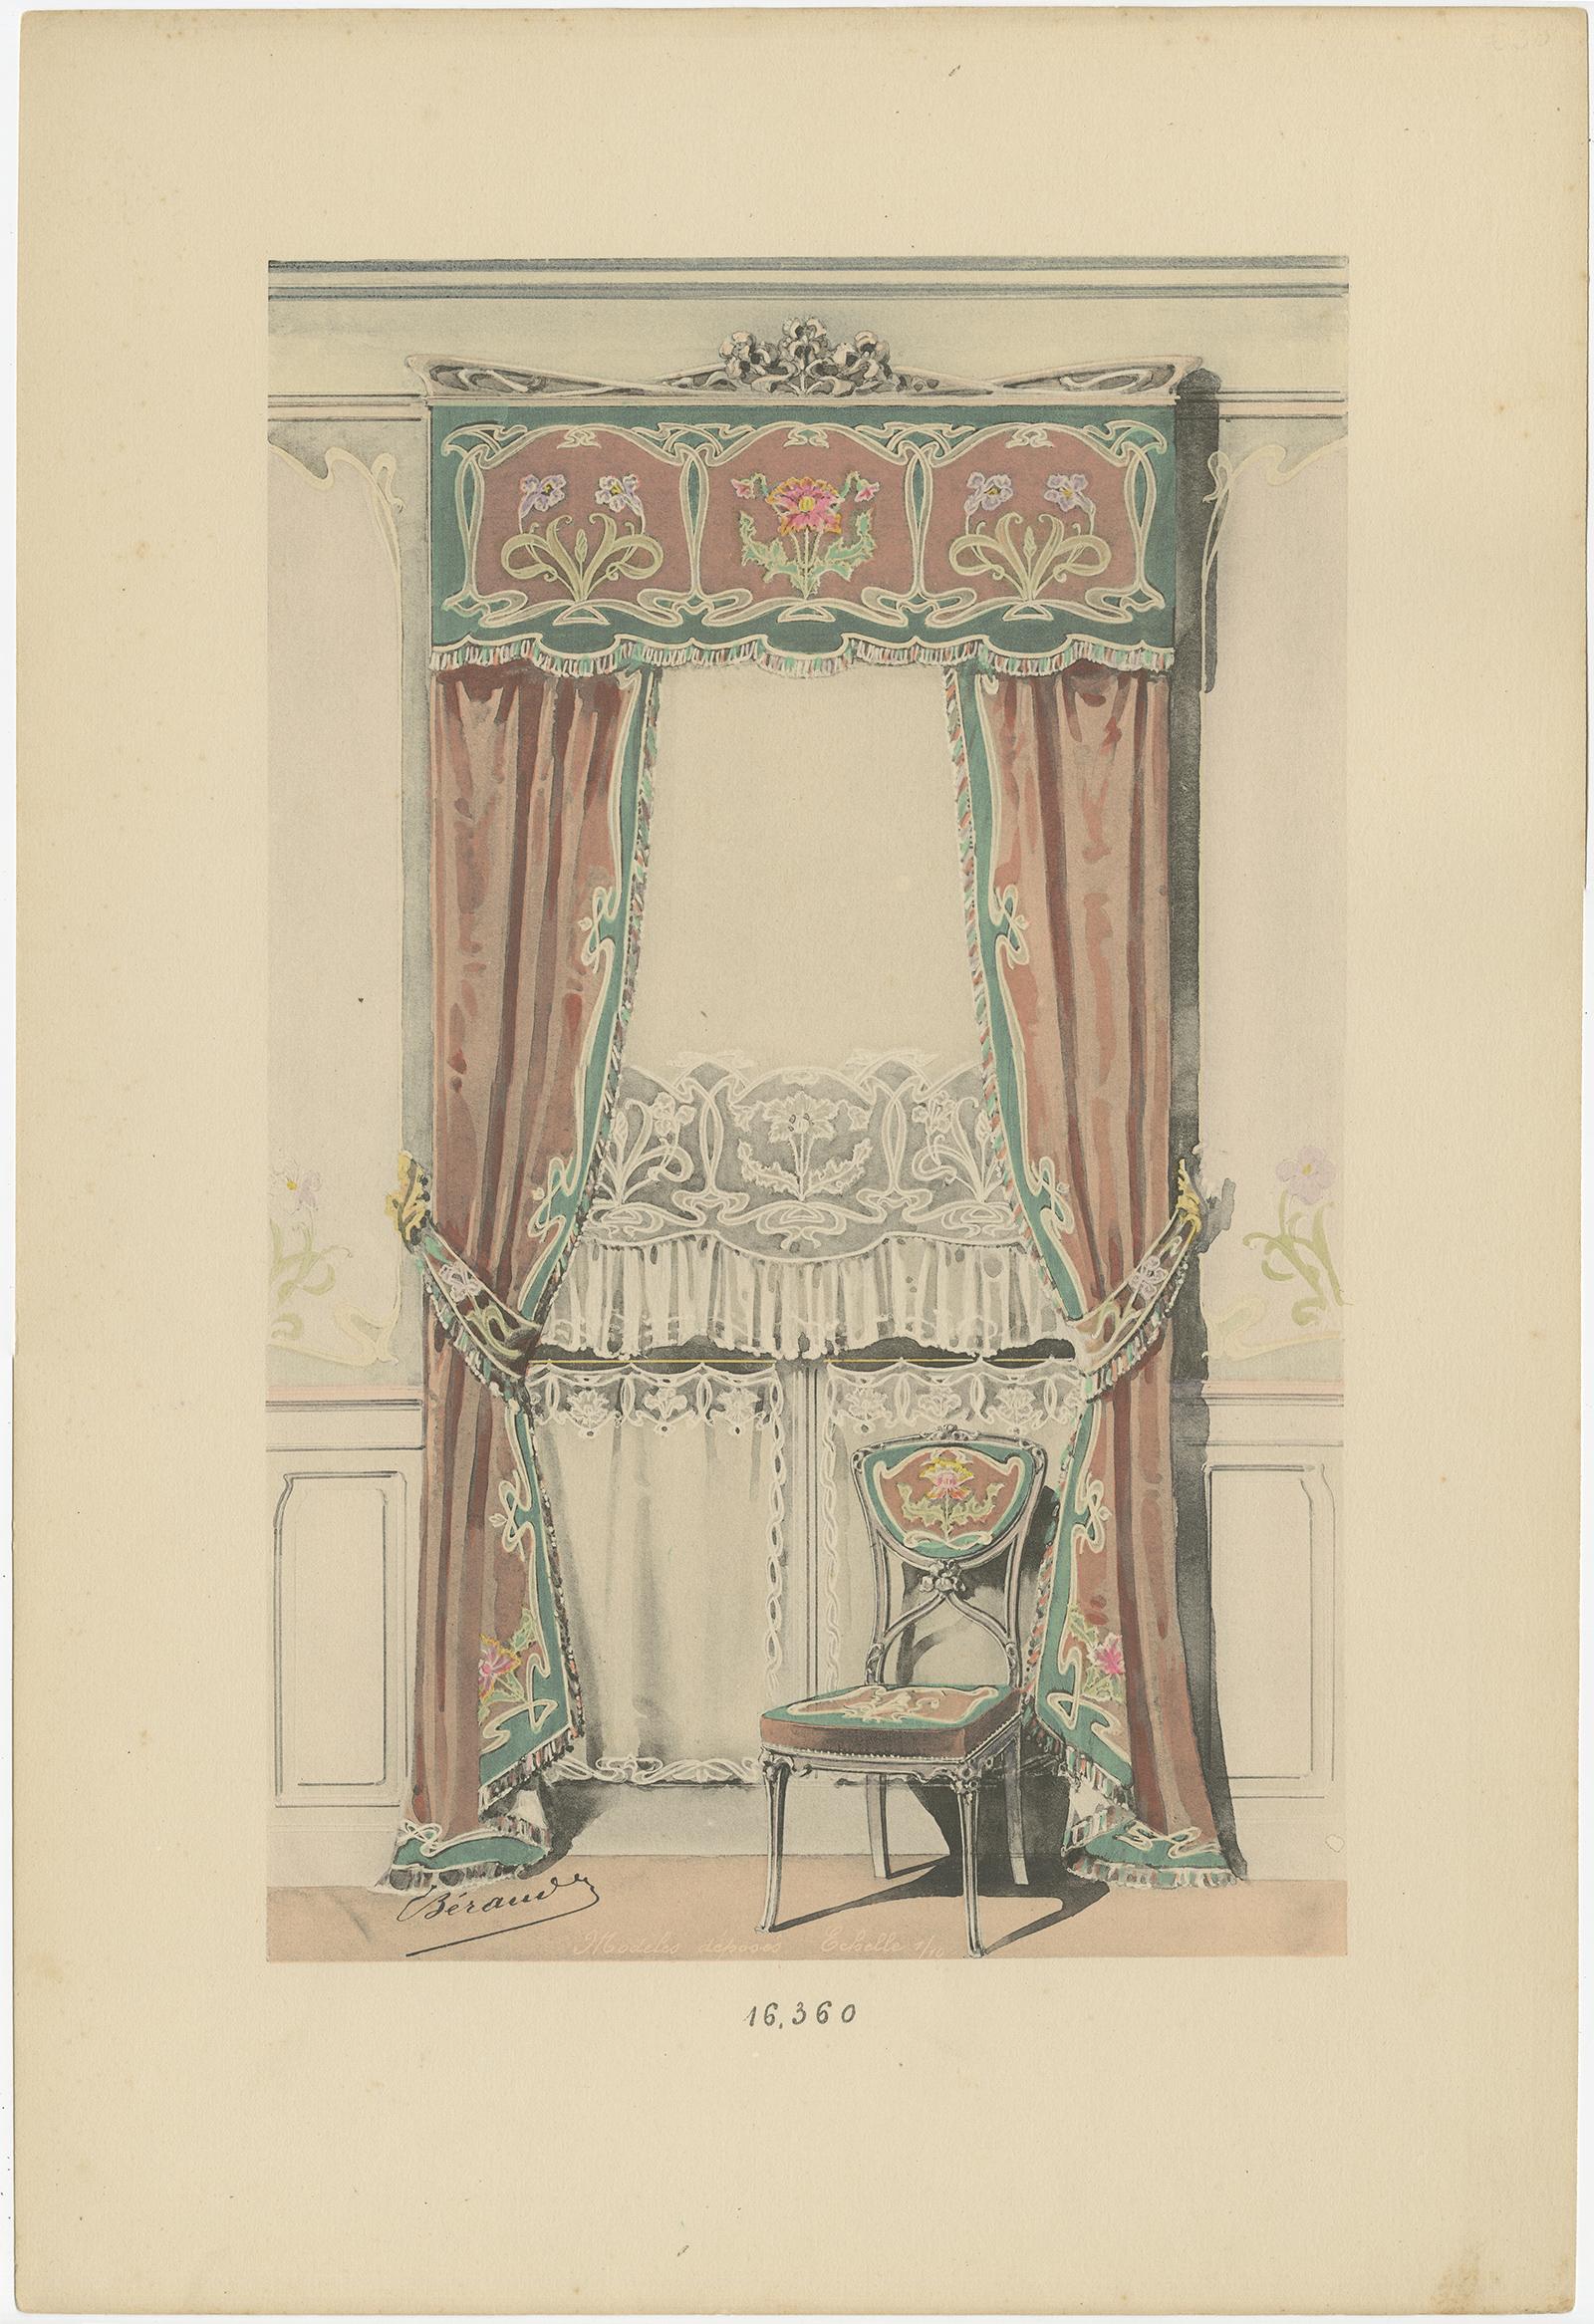 Set of two antique prints of window dressings and furniture. Draw, by Monsieur Beraud, published circa 1890.